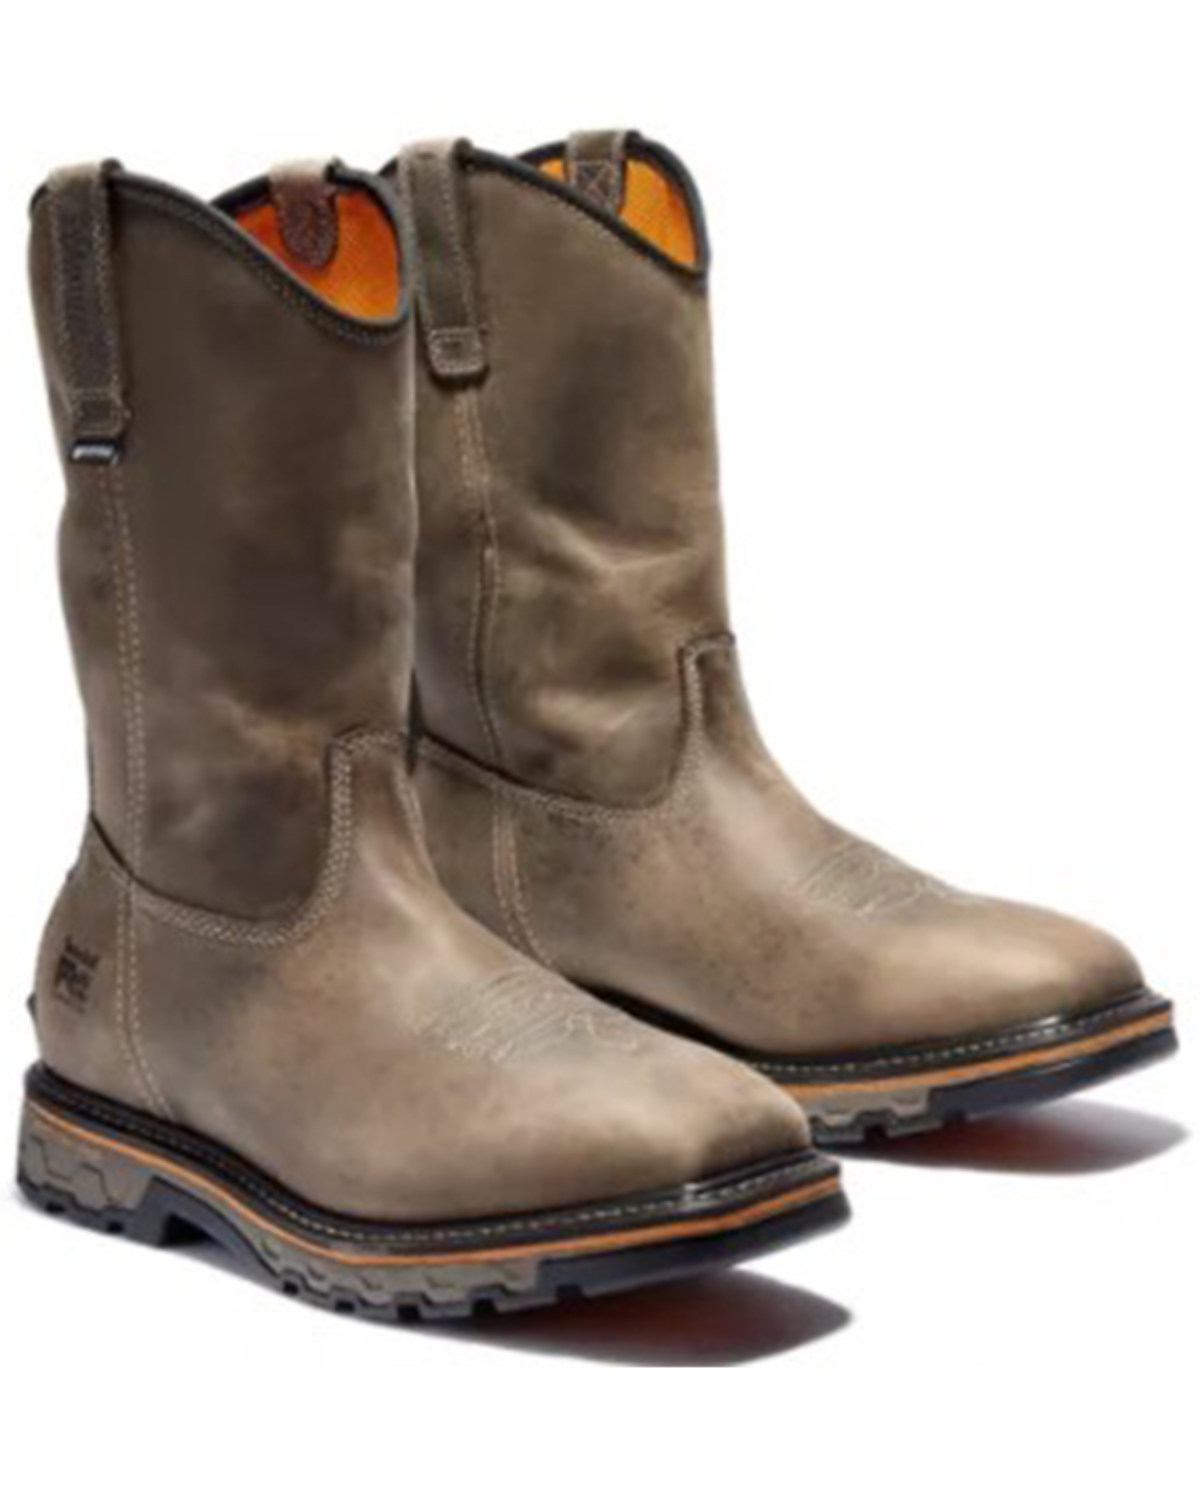 Timberland Men's True Grit Pull On Waterproof Work Boots - Square Toe